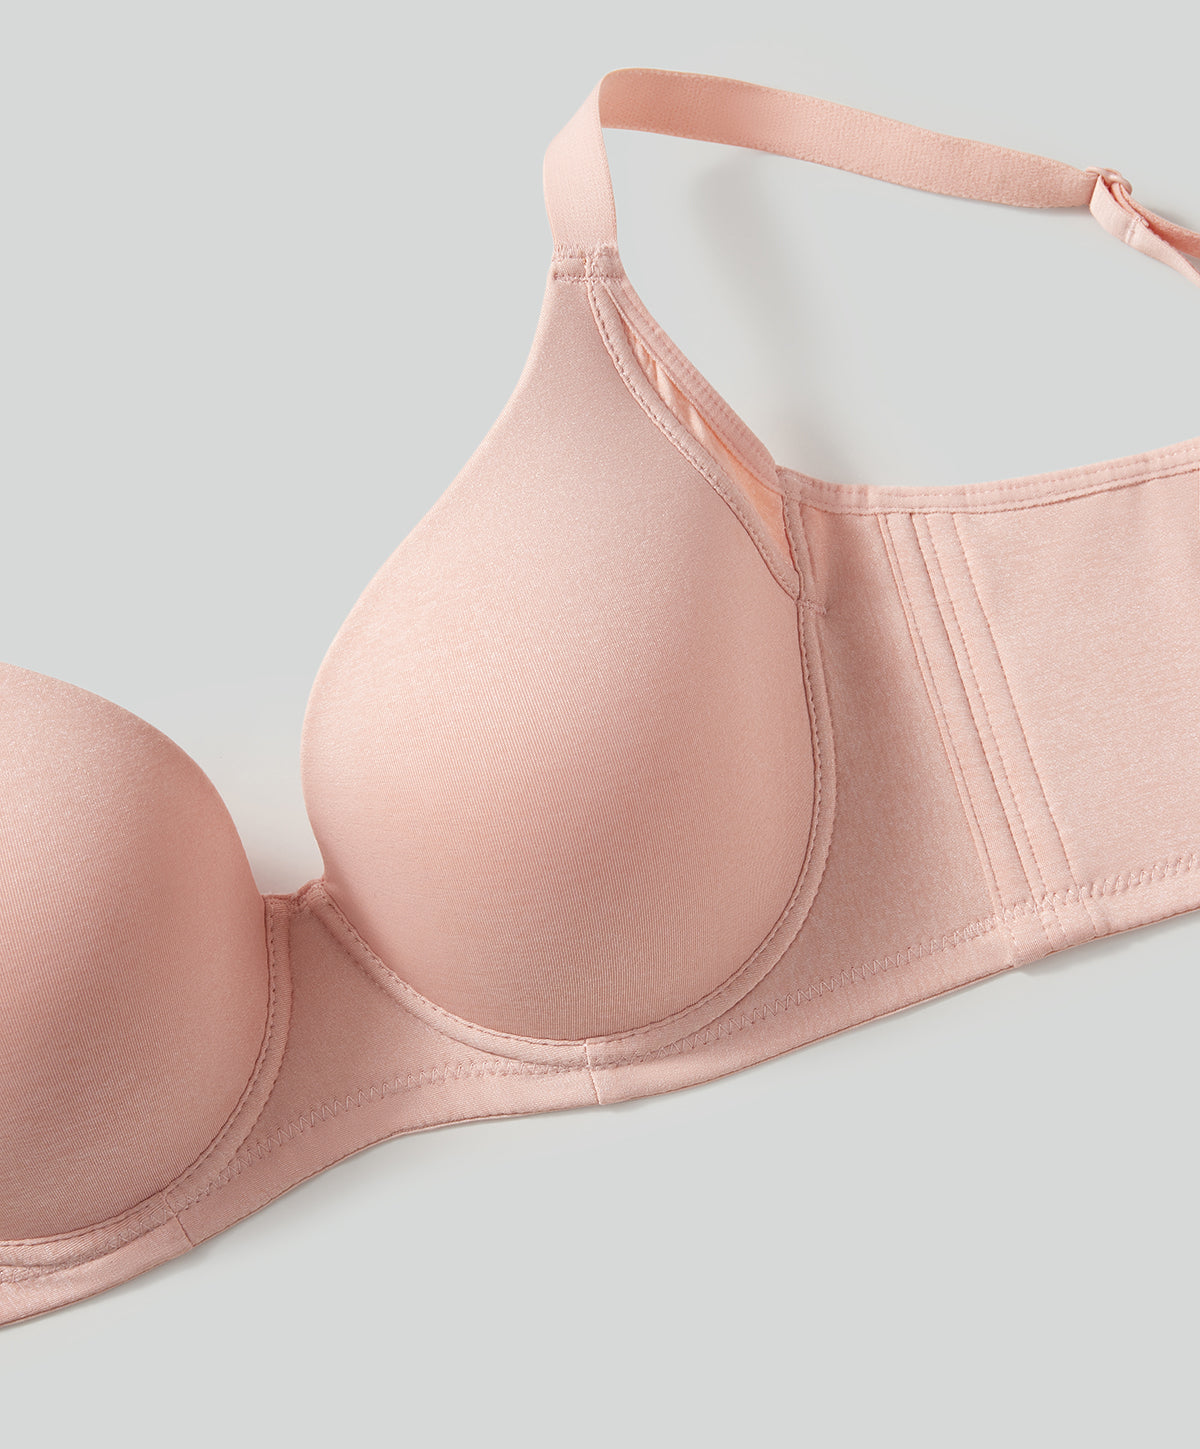 M&S 2 Pack Underwired Full Cup Smoothing Bras Algeria